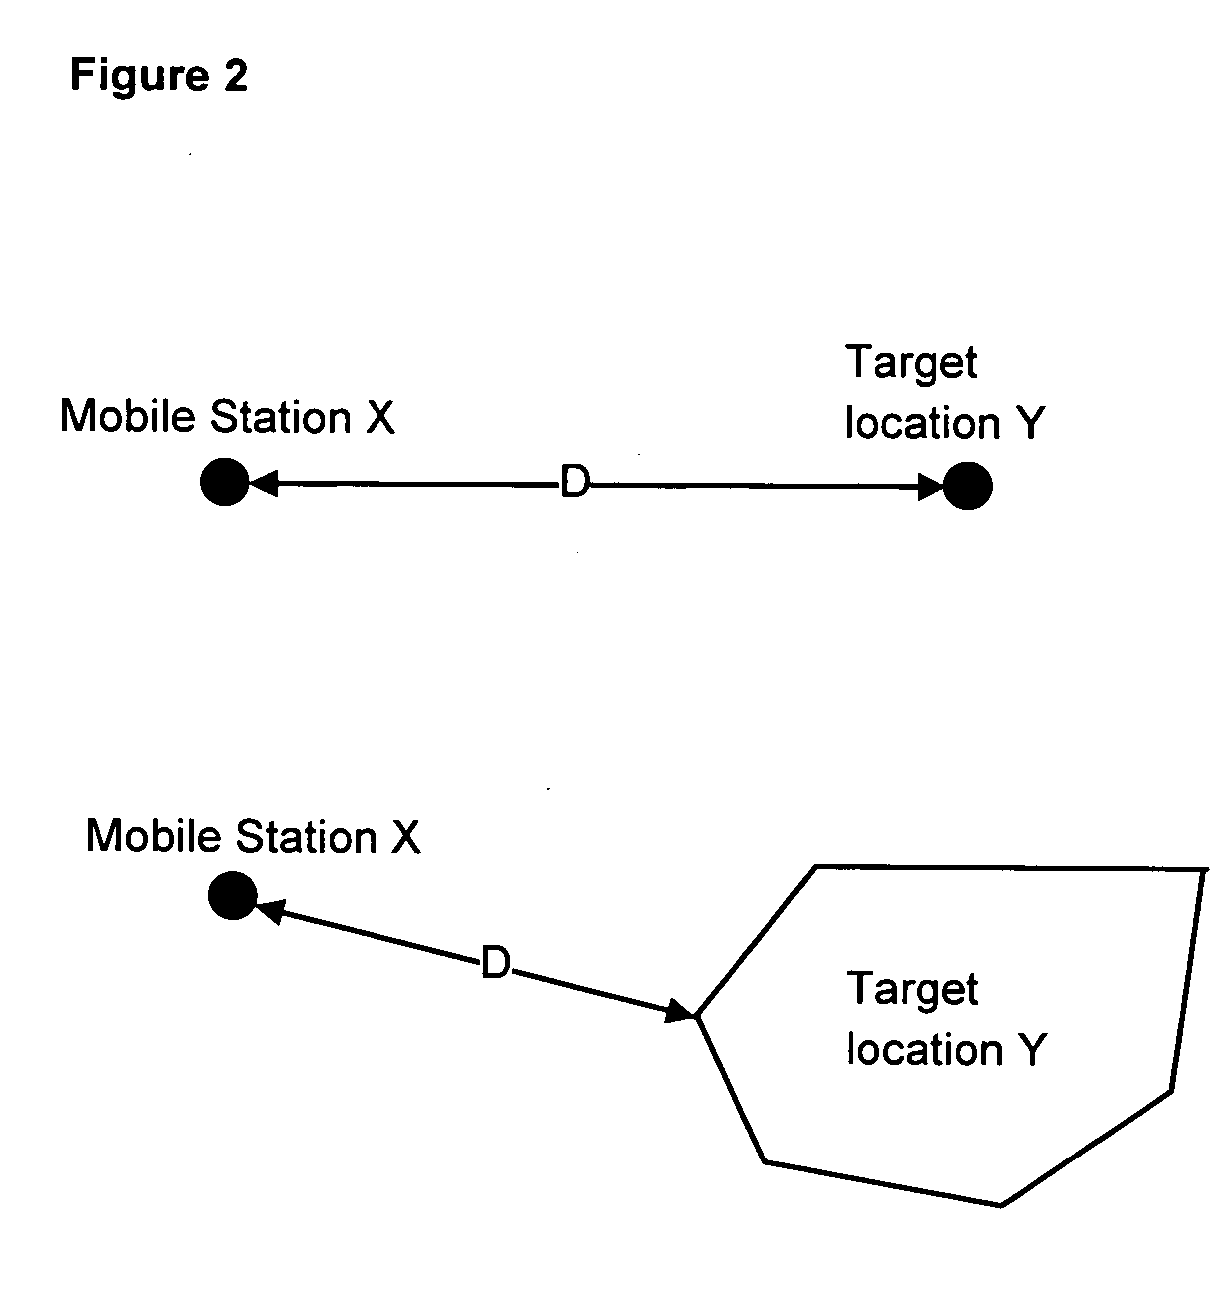 System for providing alert-based services to mobile stations in a wireless communications network